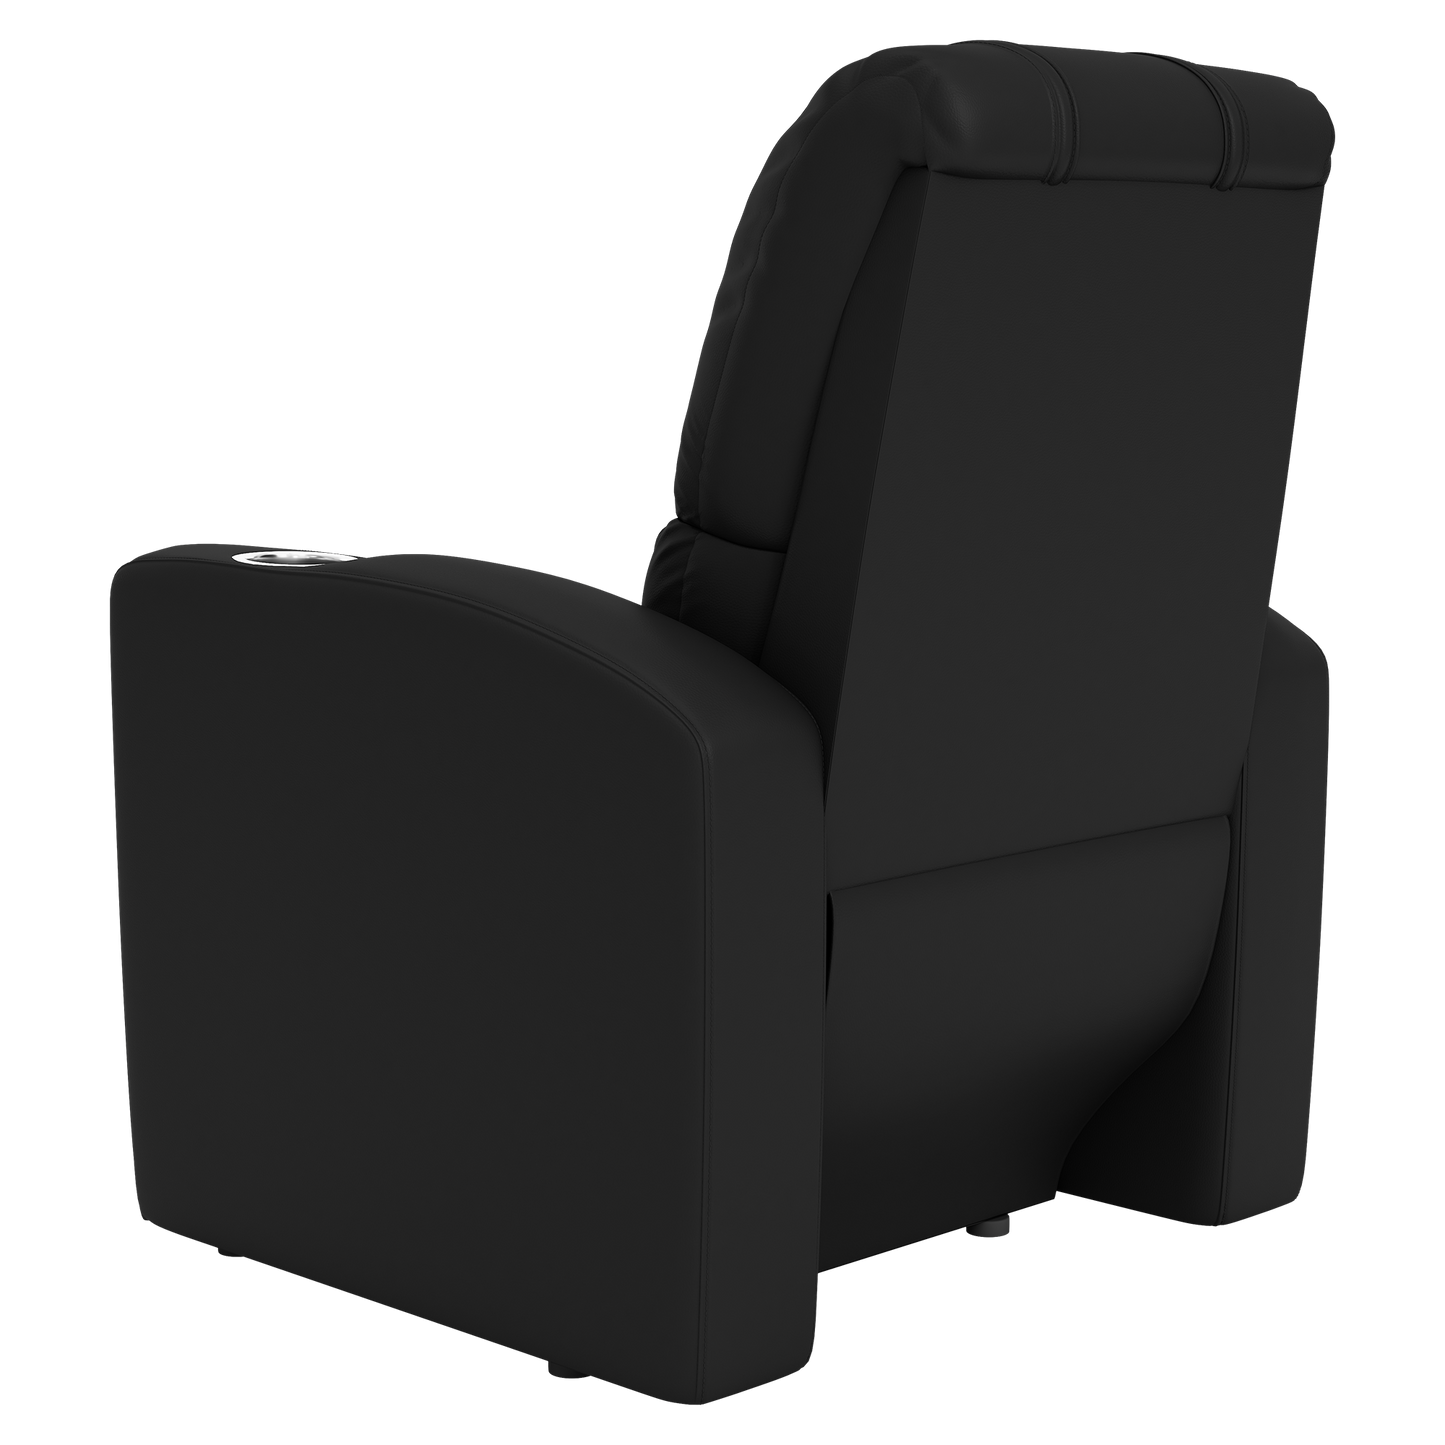 Stealth Recliner with Chicago Cubs Secondary